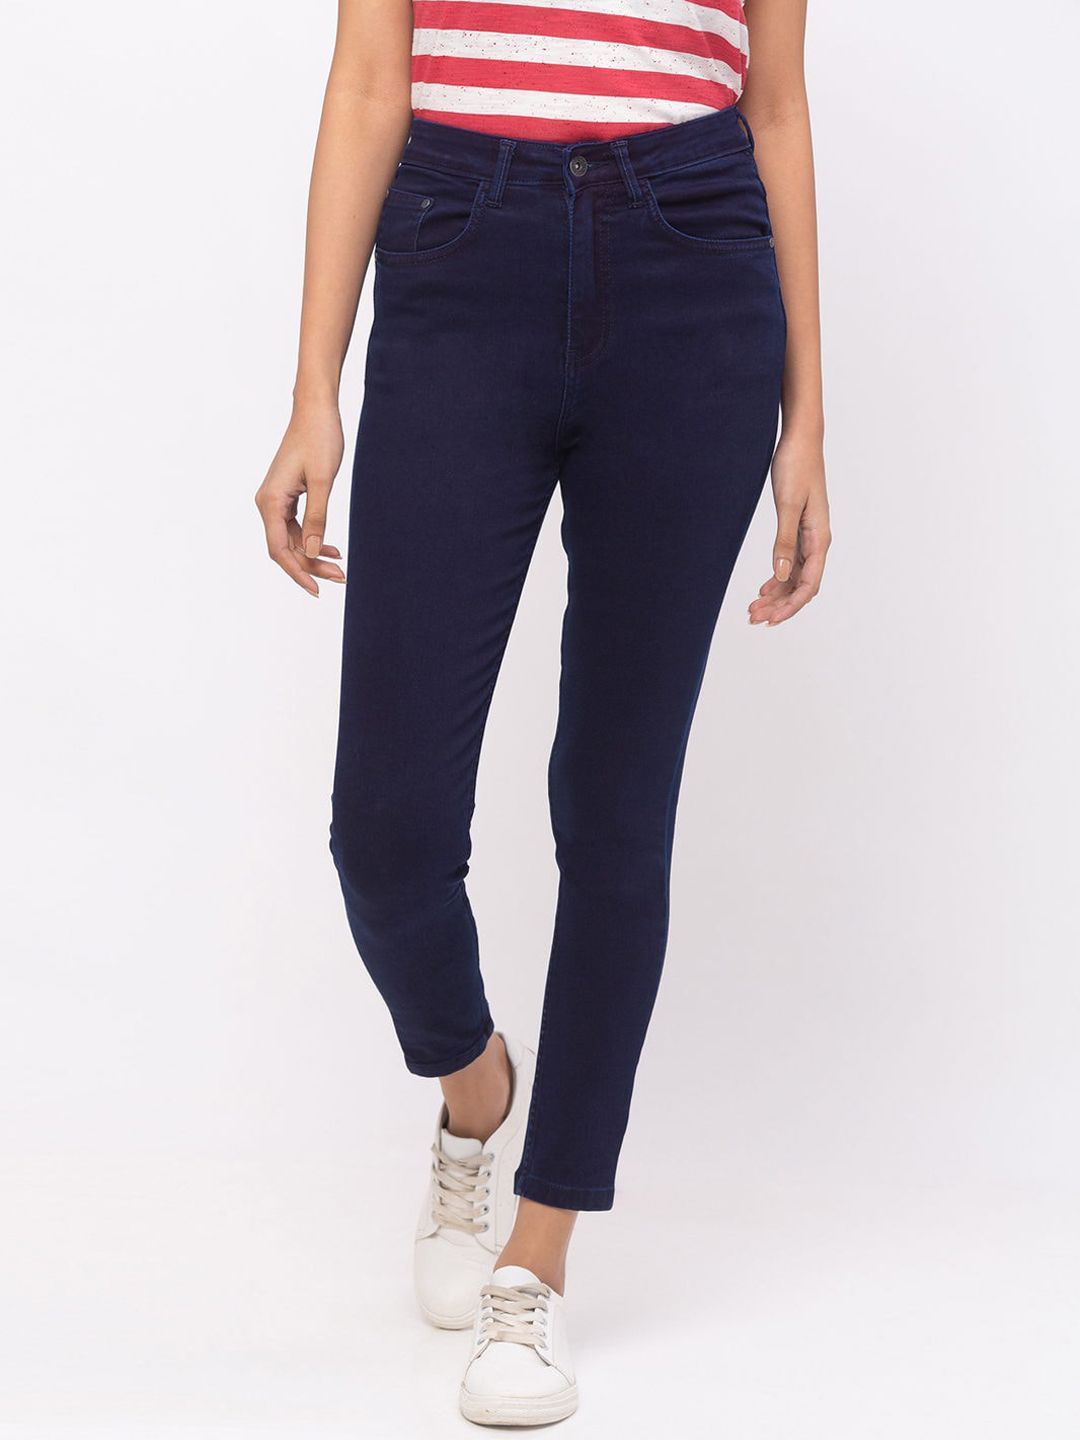 ZOLA Women Blue Slim Fit Crpped Jeans Price in India